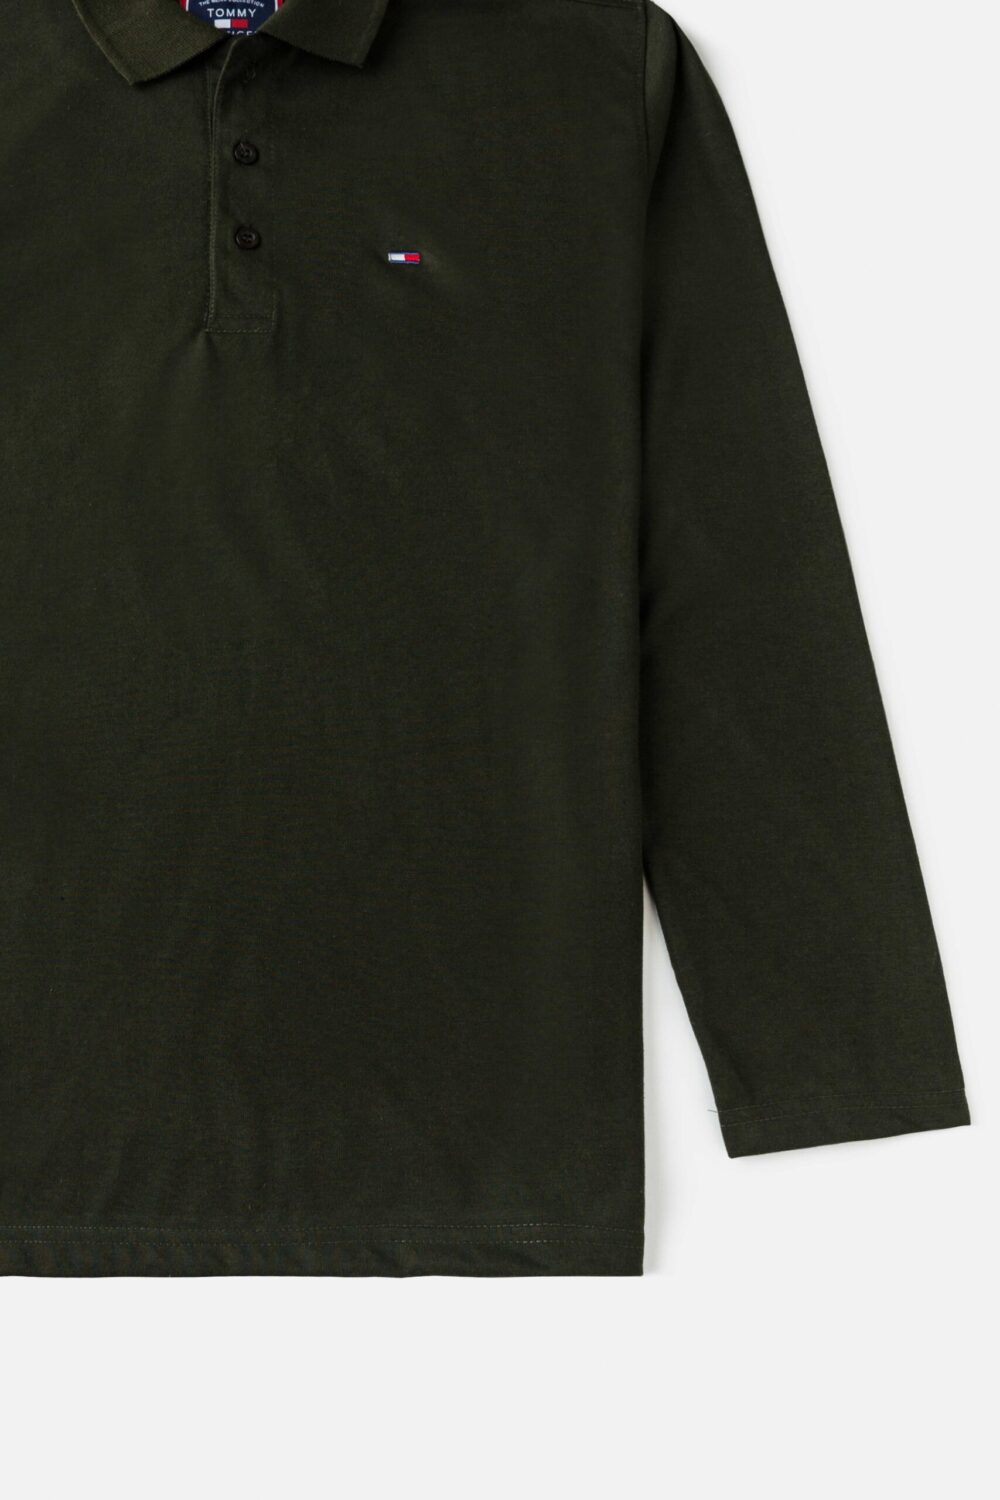 Tommy Premium Full Polo Shirt – Army Green